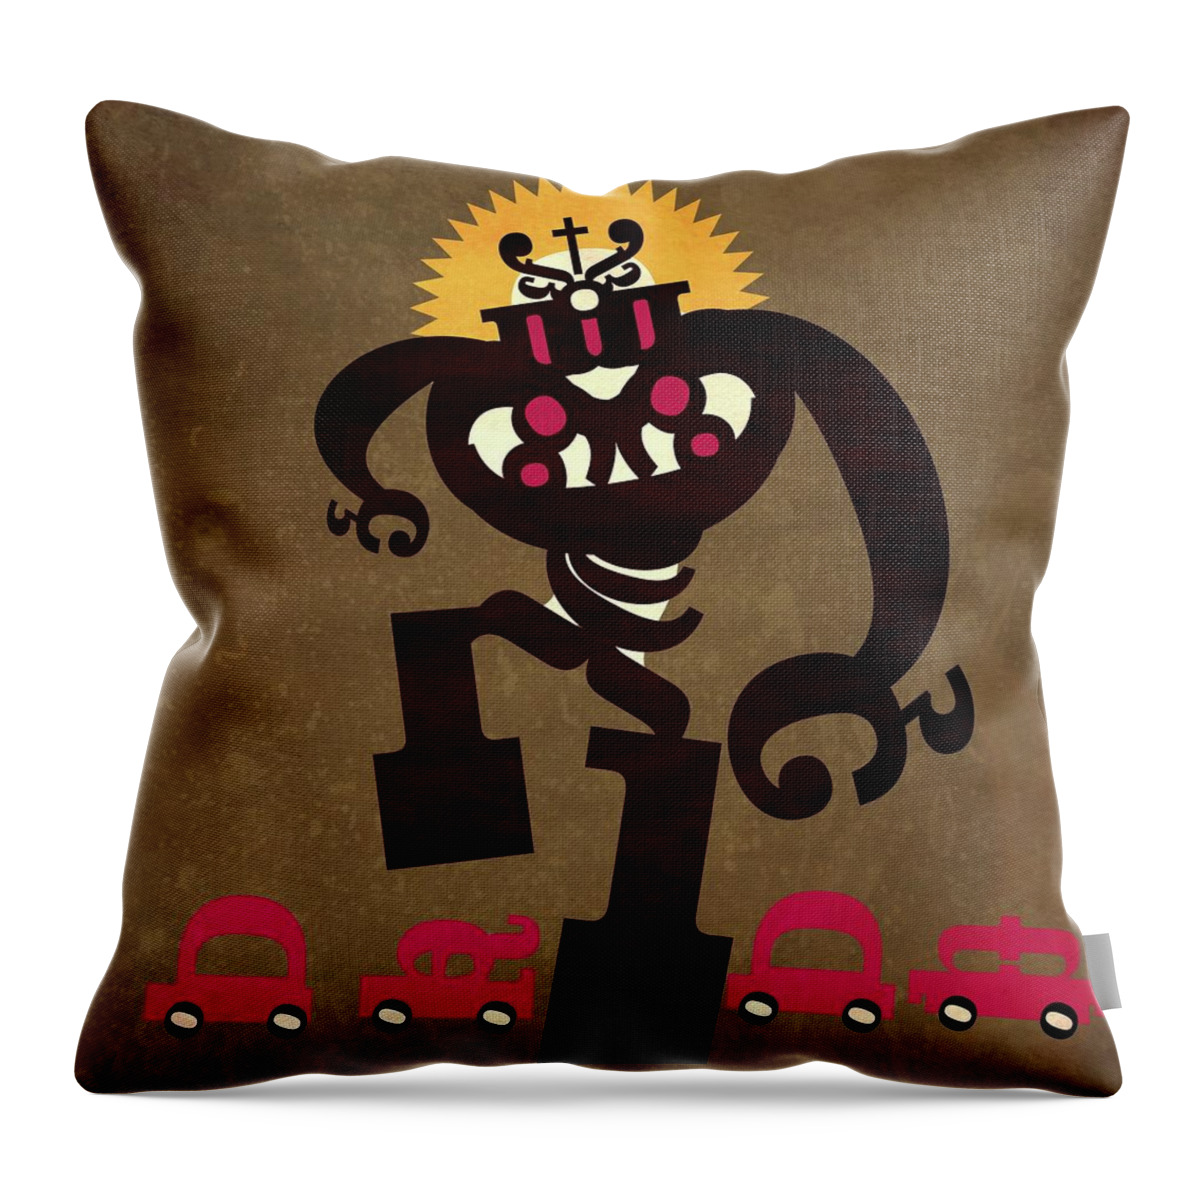 Land Vehicle Throw Pillow featuring the digital art Giant Metal Robot by Marco Recuero